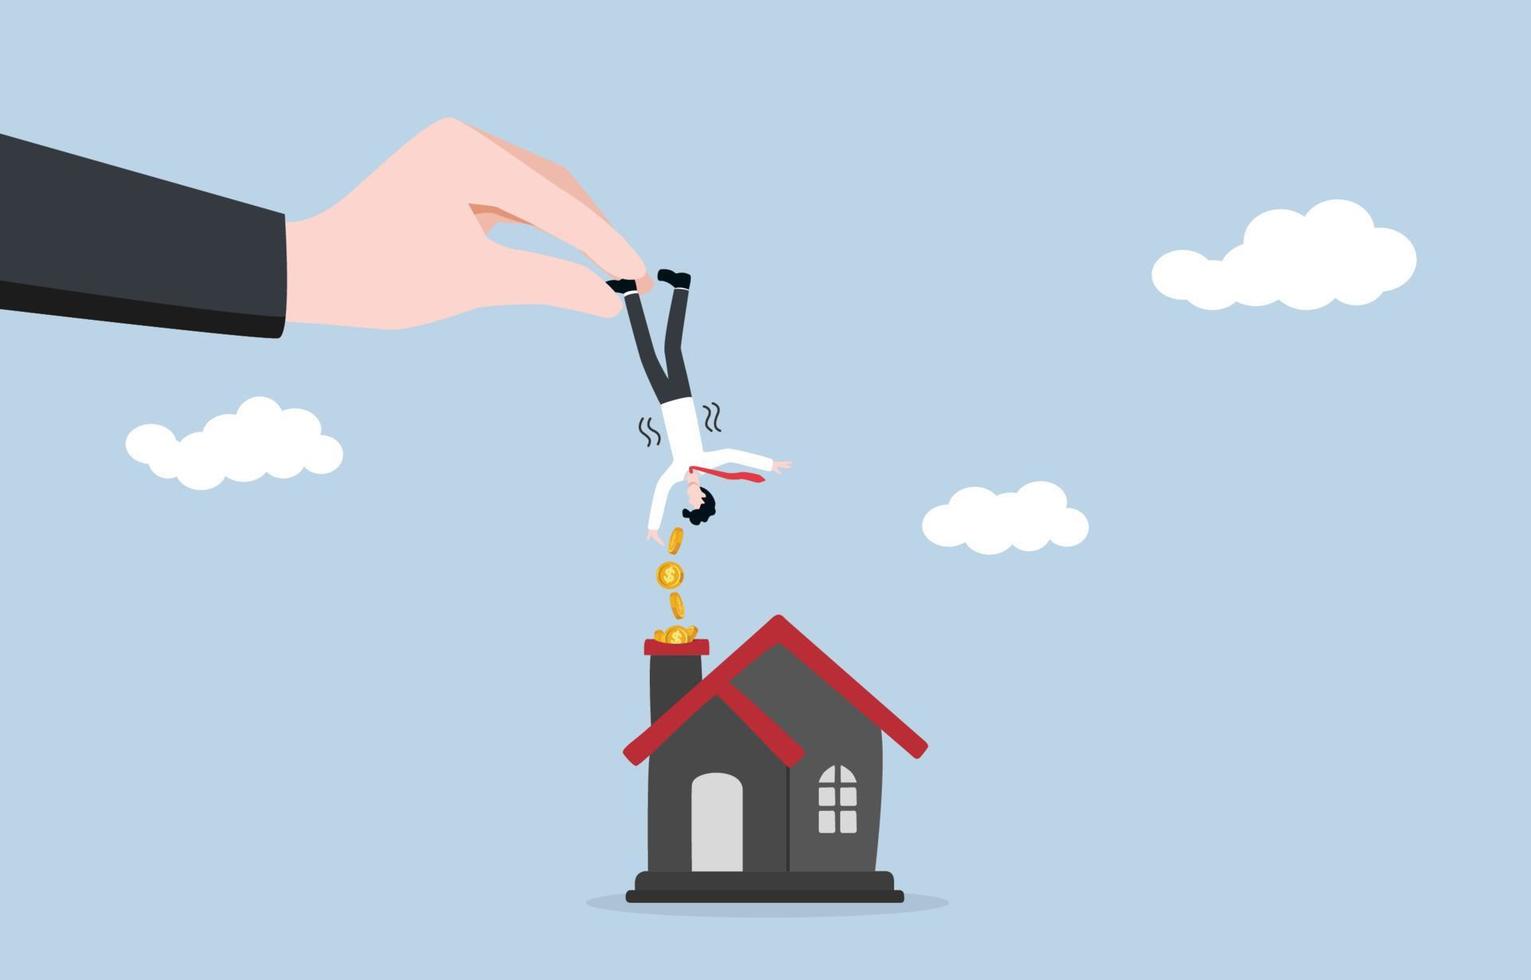 Reminder for paying off real estate or mortgage debt, bank repayment notification, Interest payment date concept. Bank staff catching tiny businessman and shaking to get money to house chimney slot. vector